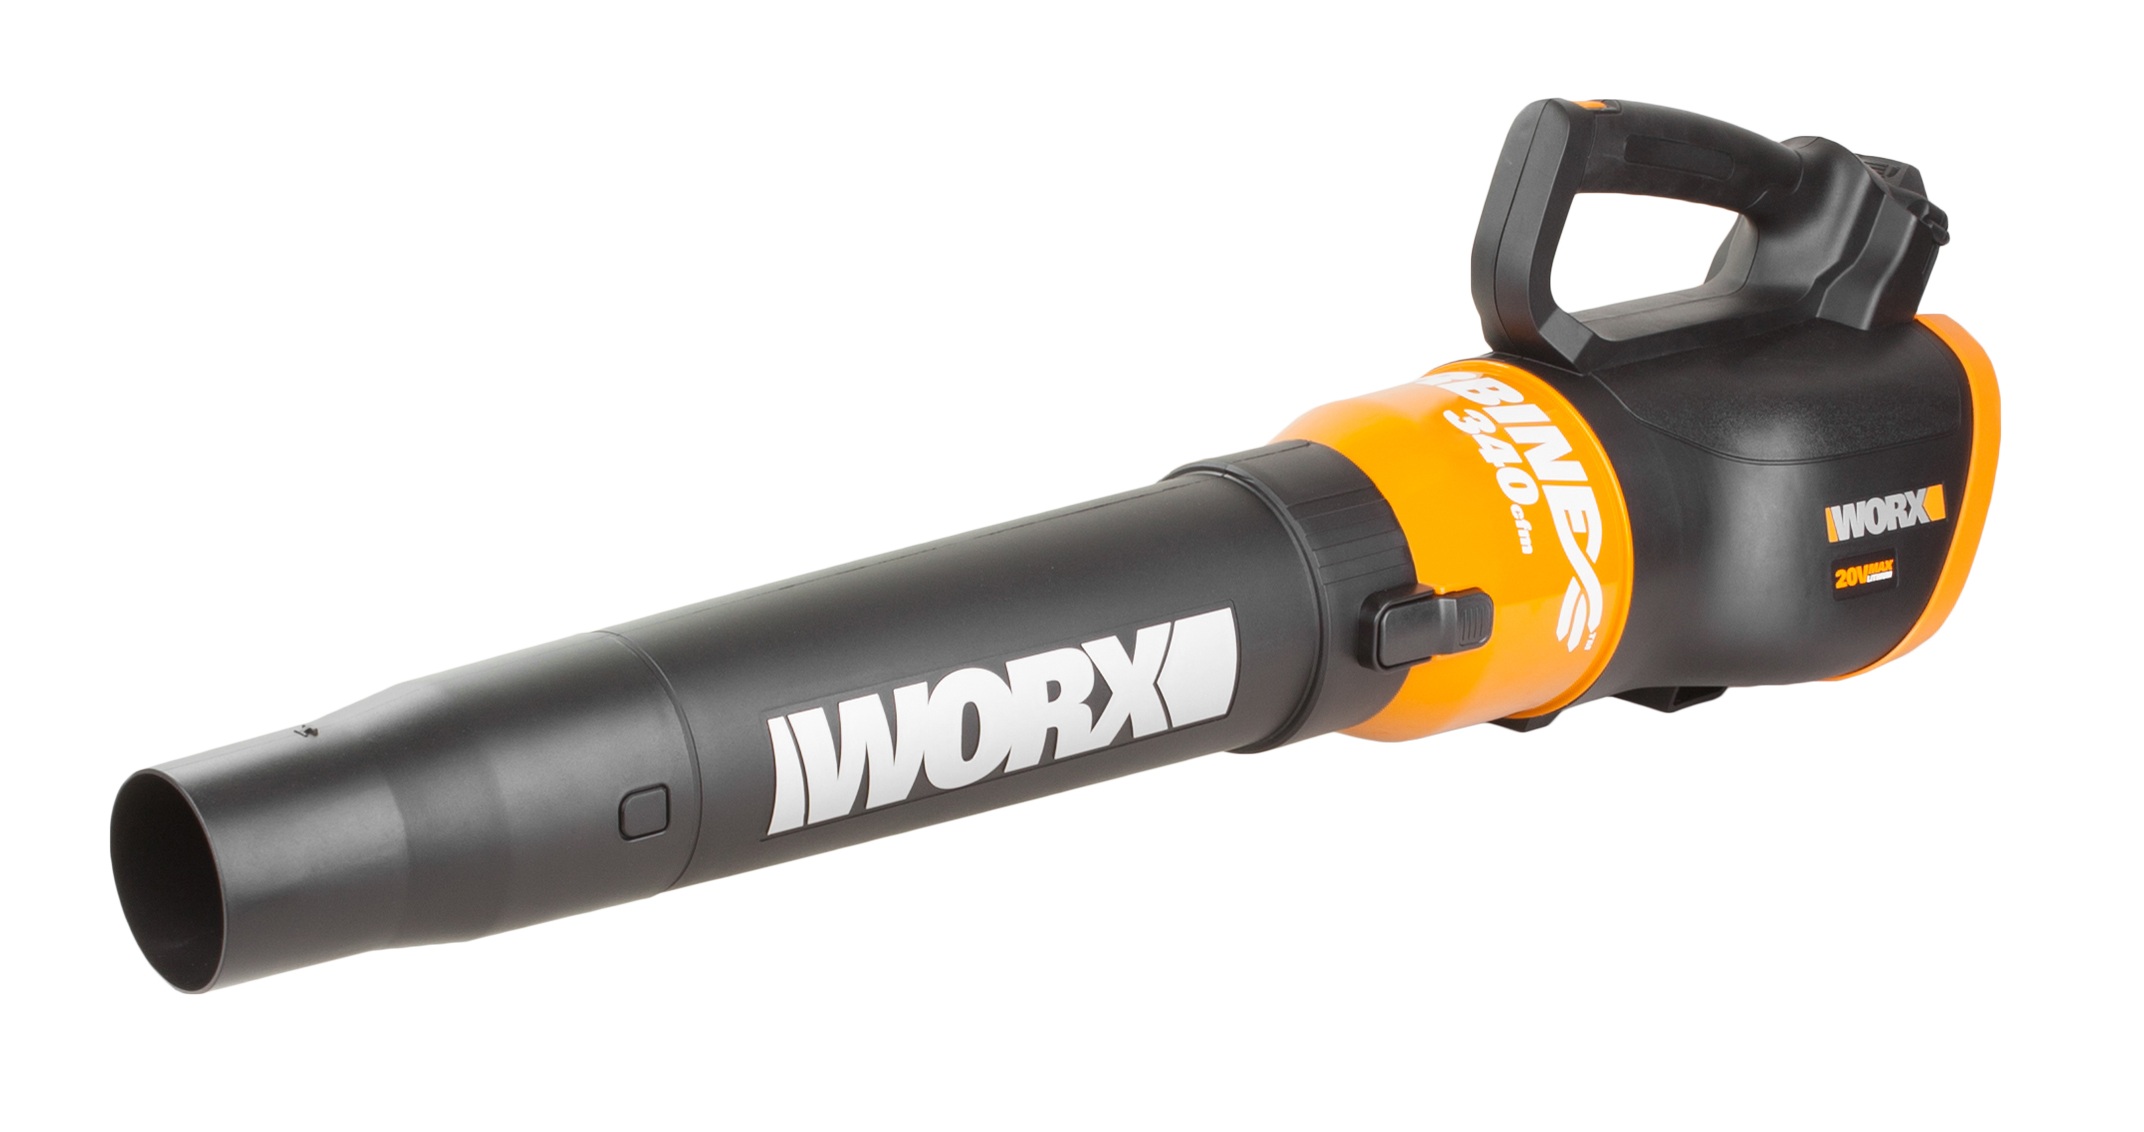 WORX AIR 20V TURBINE Blower pulls air directly into the fan and immediately forces it out through the blower tube at up to 90 mph.